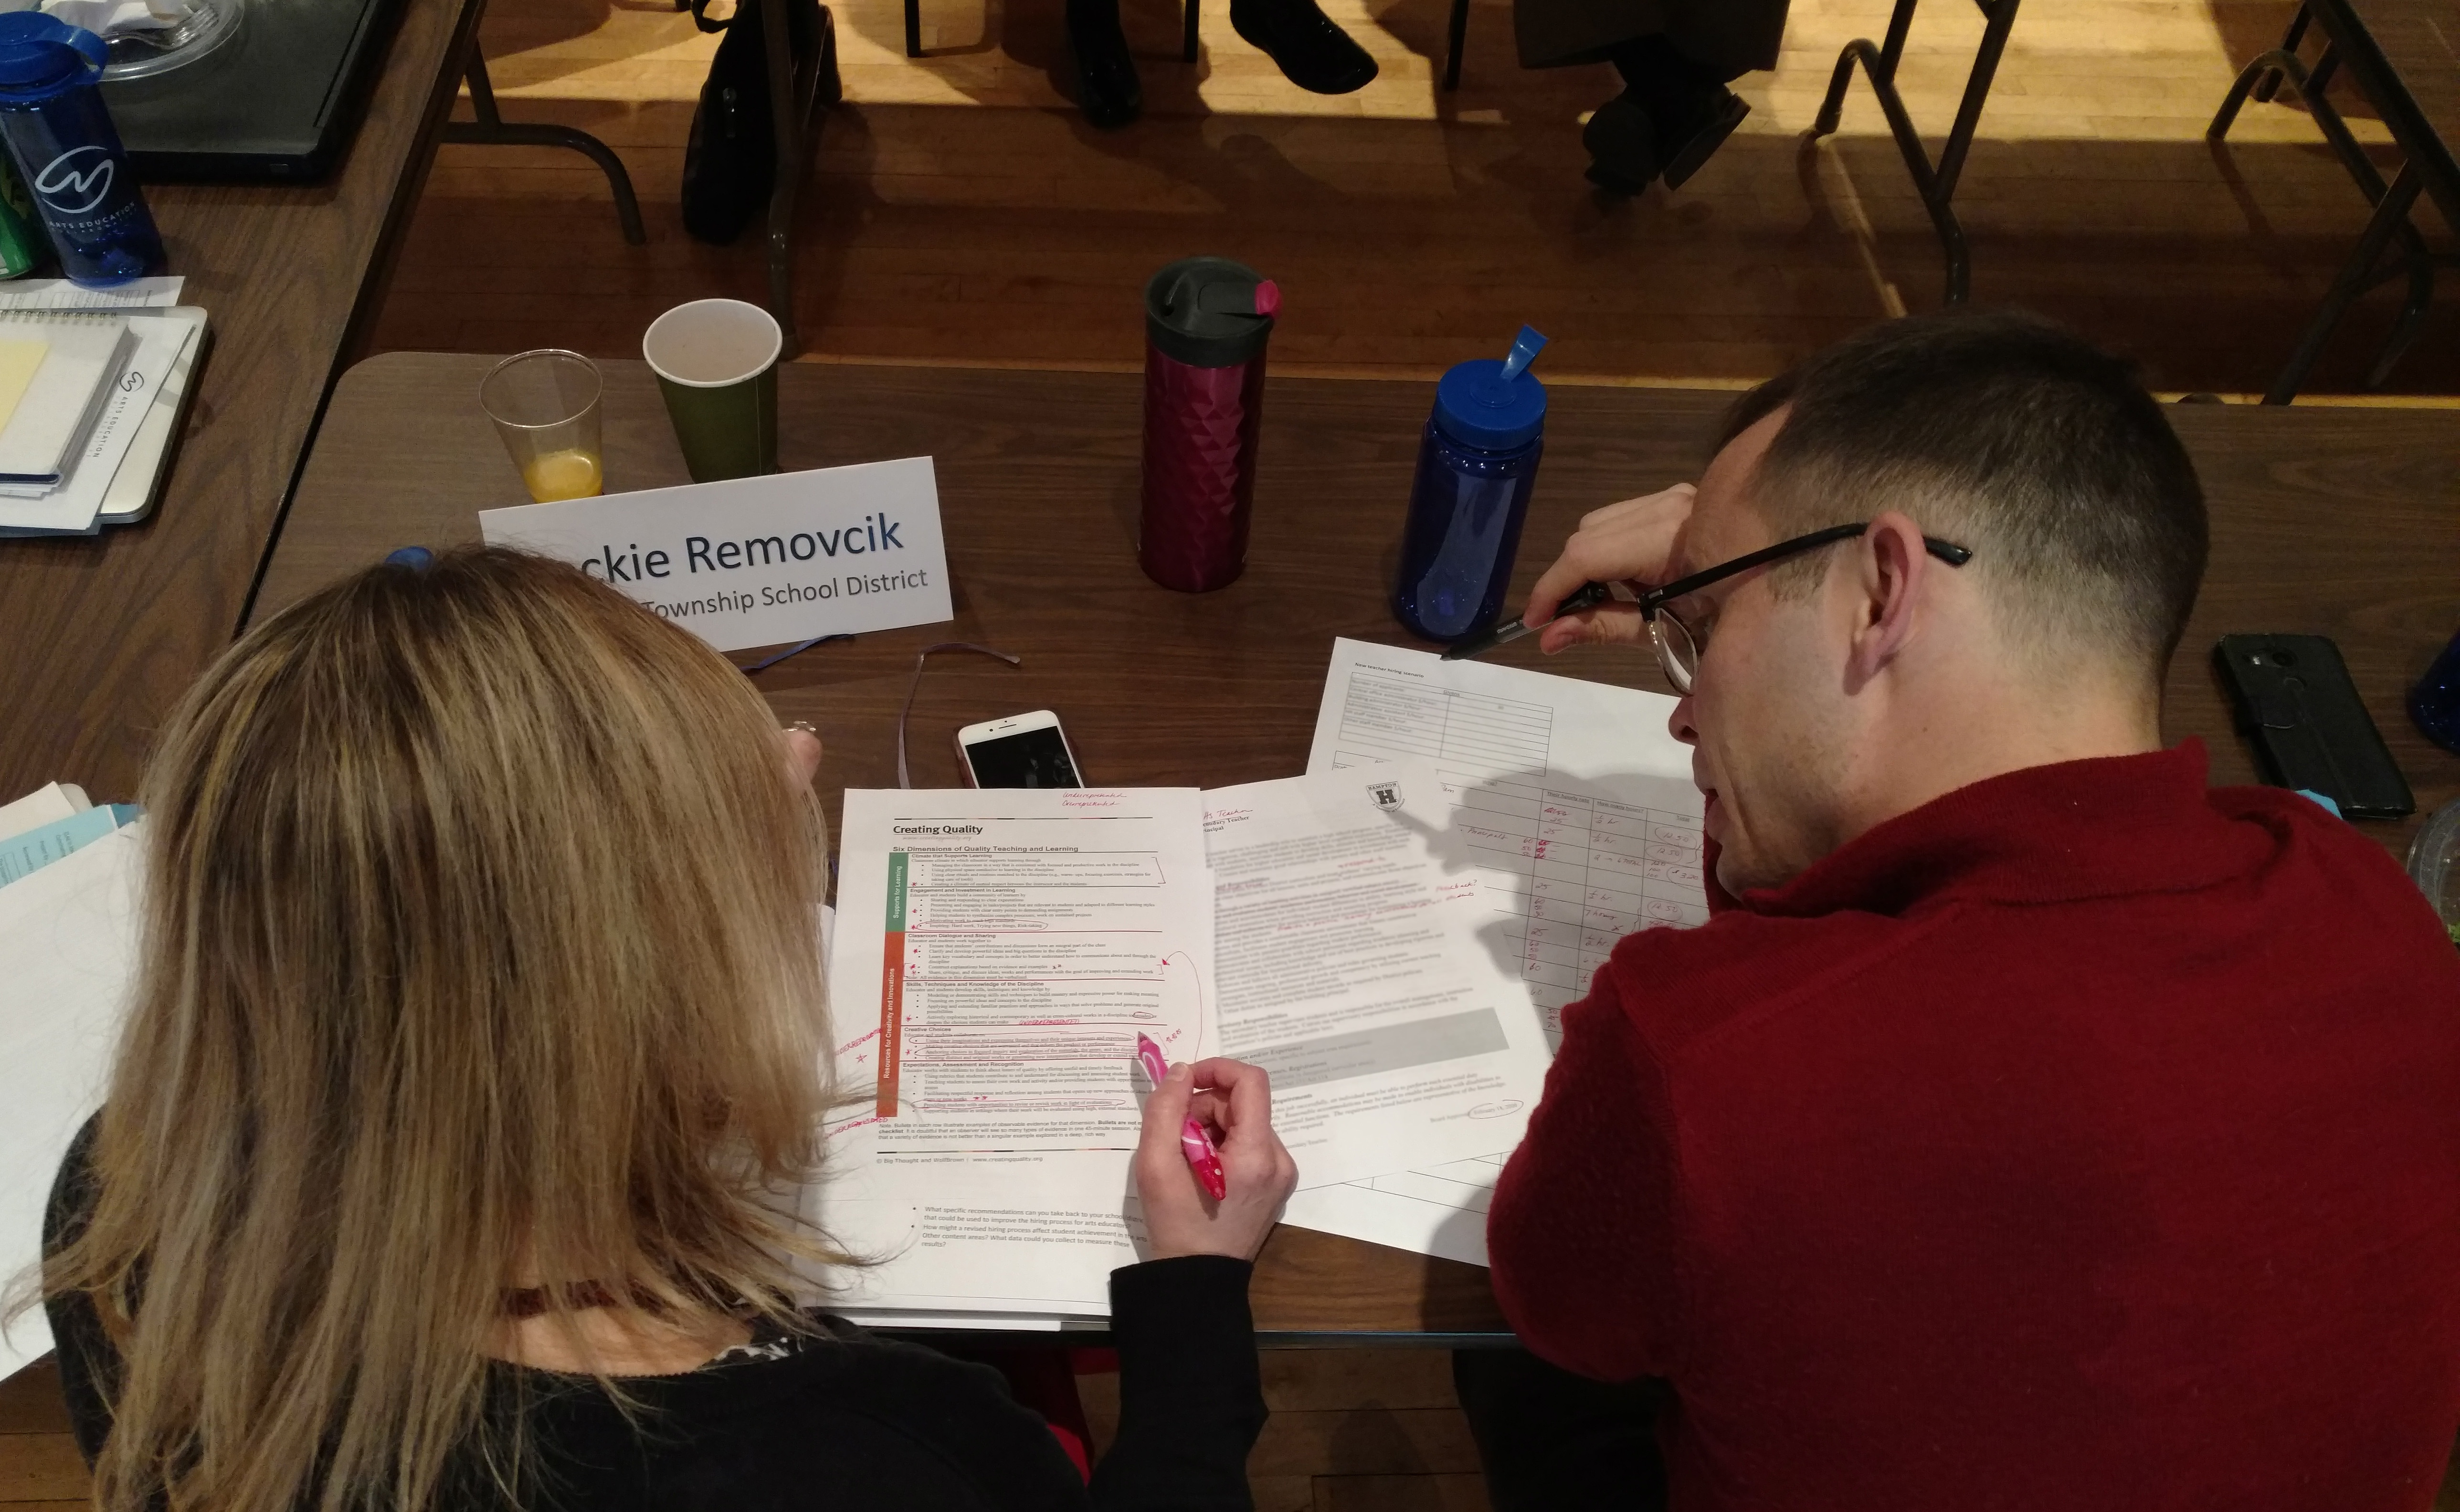 Dr. Jacquelyn Removcik and another administrator look closely at interview protocols.